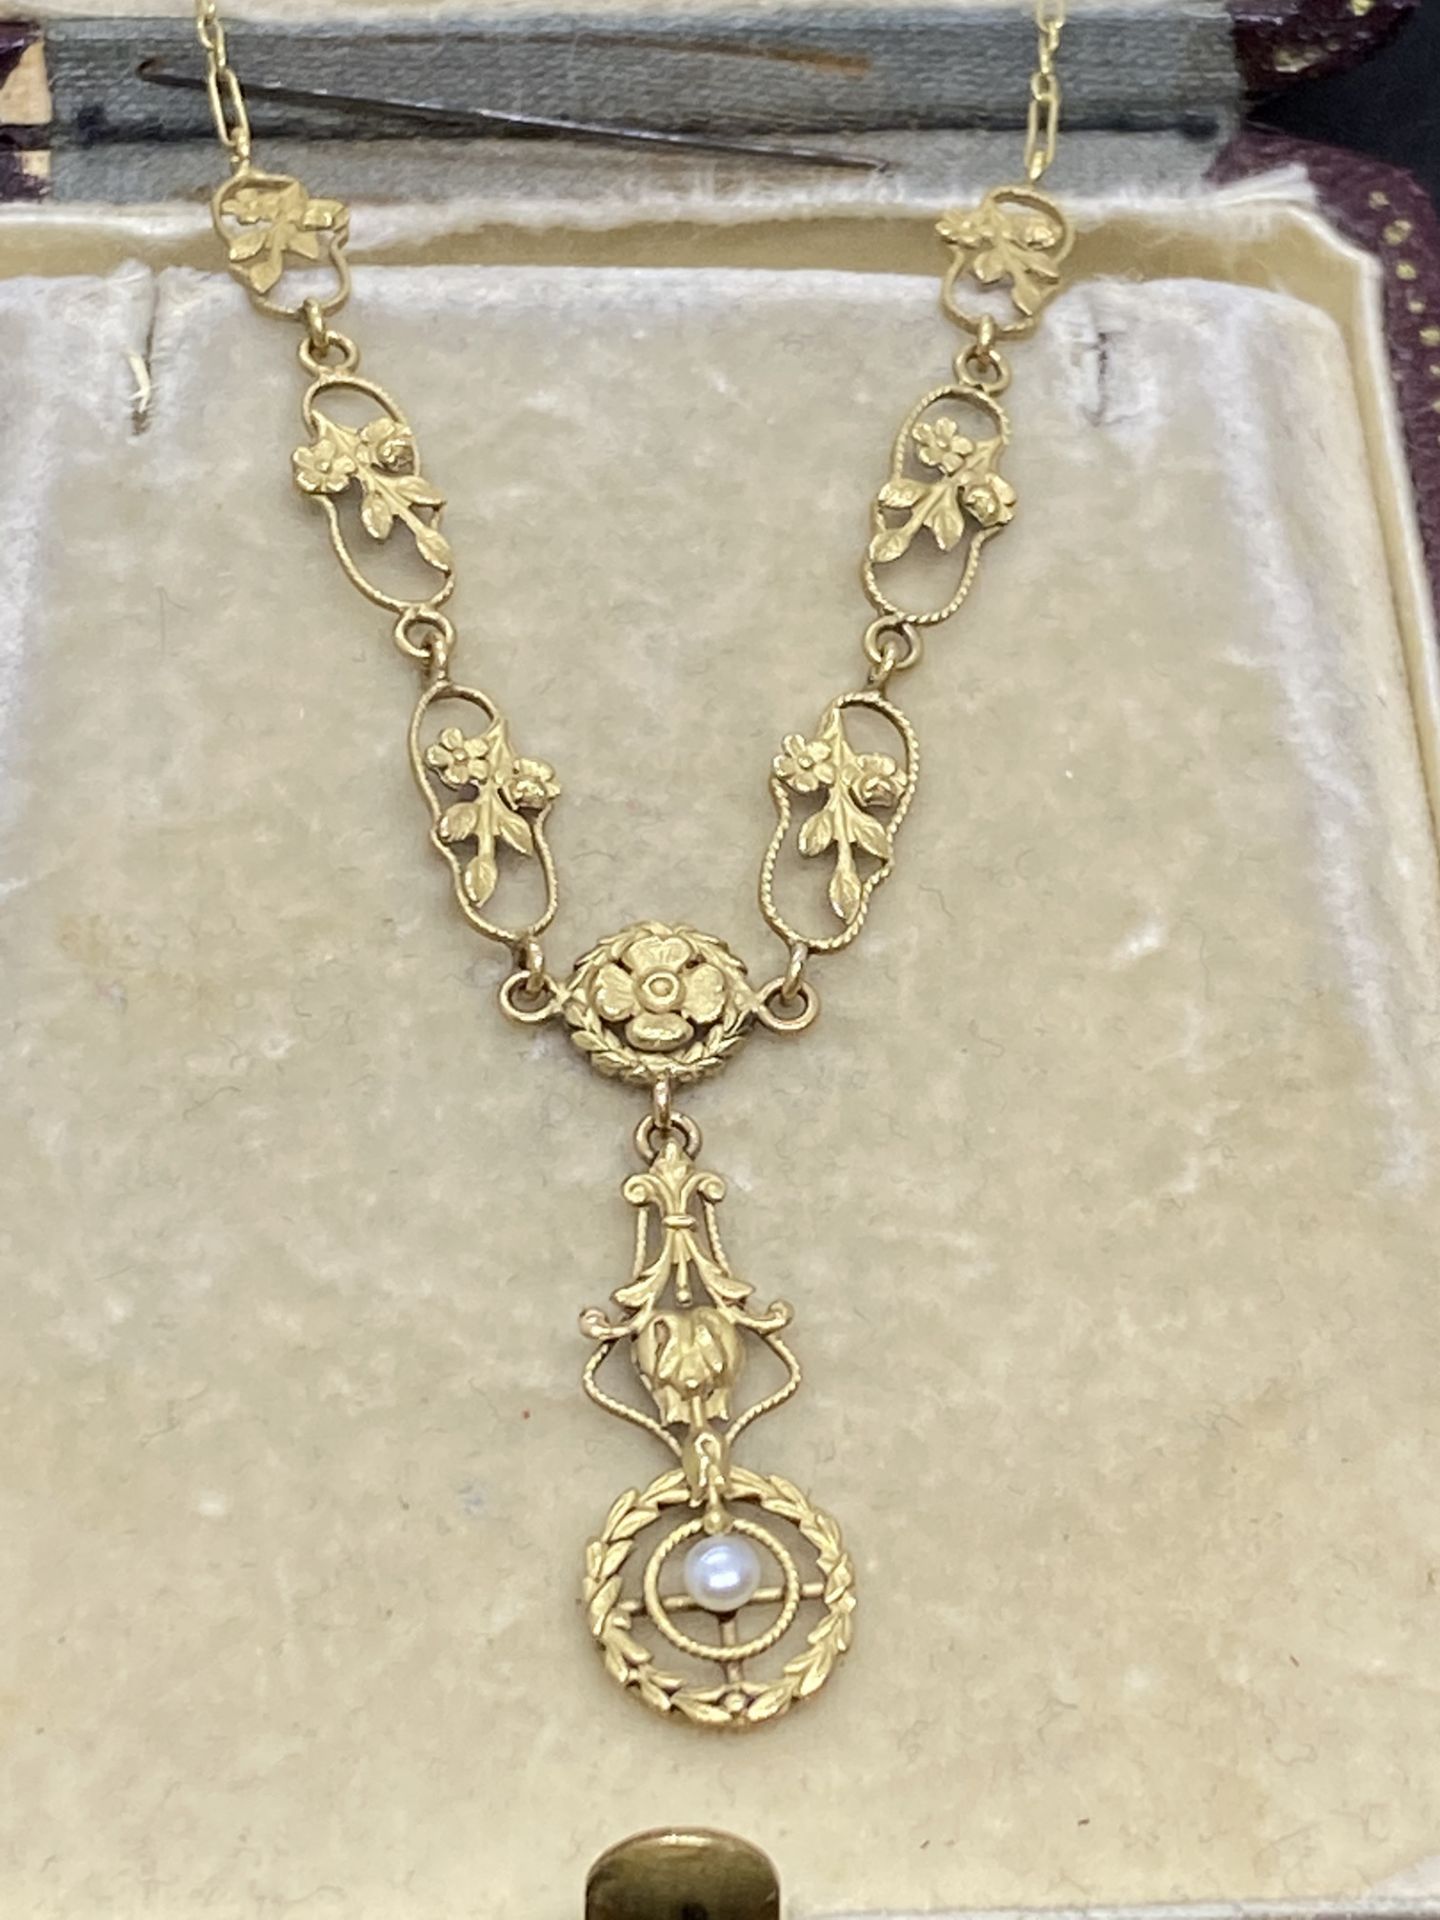 ANTIQUE FRENCH 18ct GOLD PENDANT SET WITH SEED PEARLS - Image 3 of 4